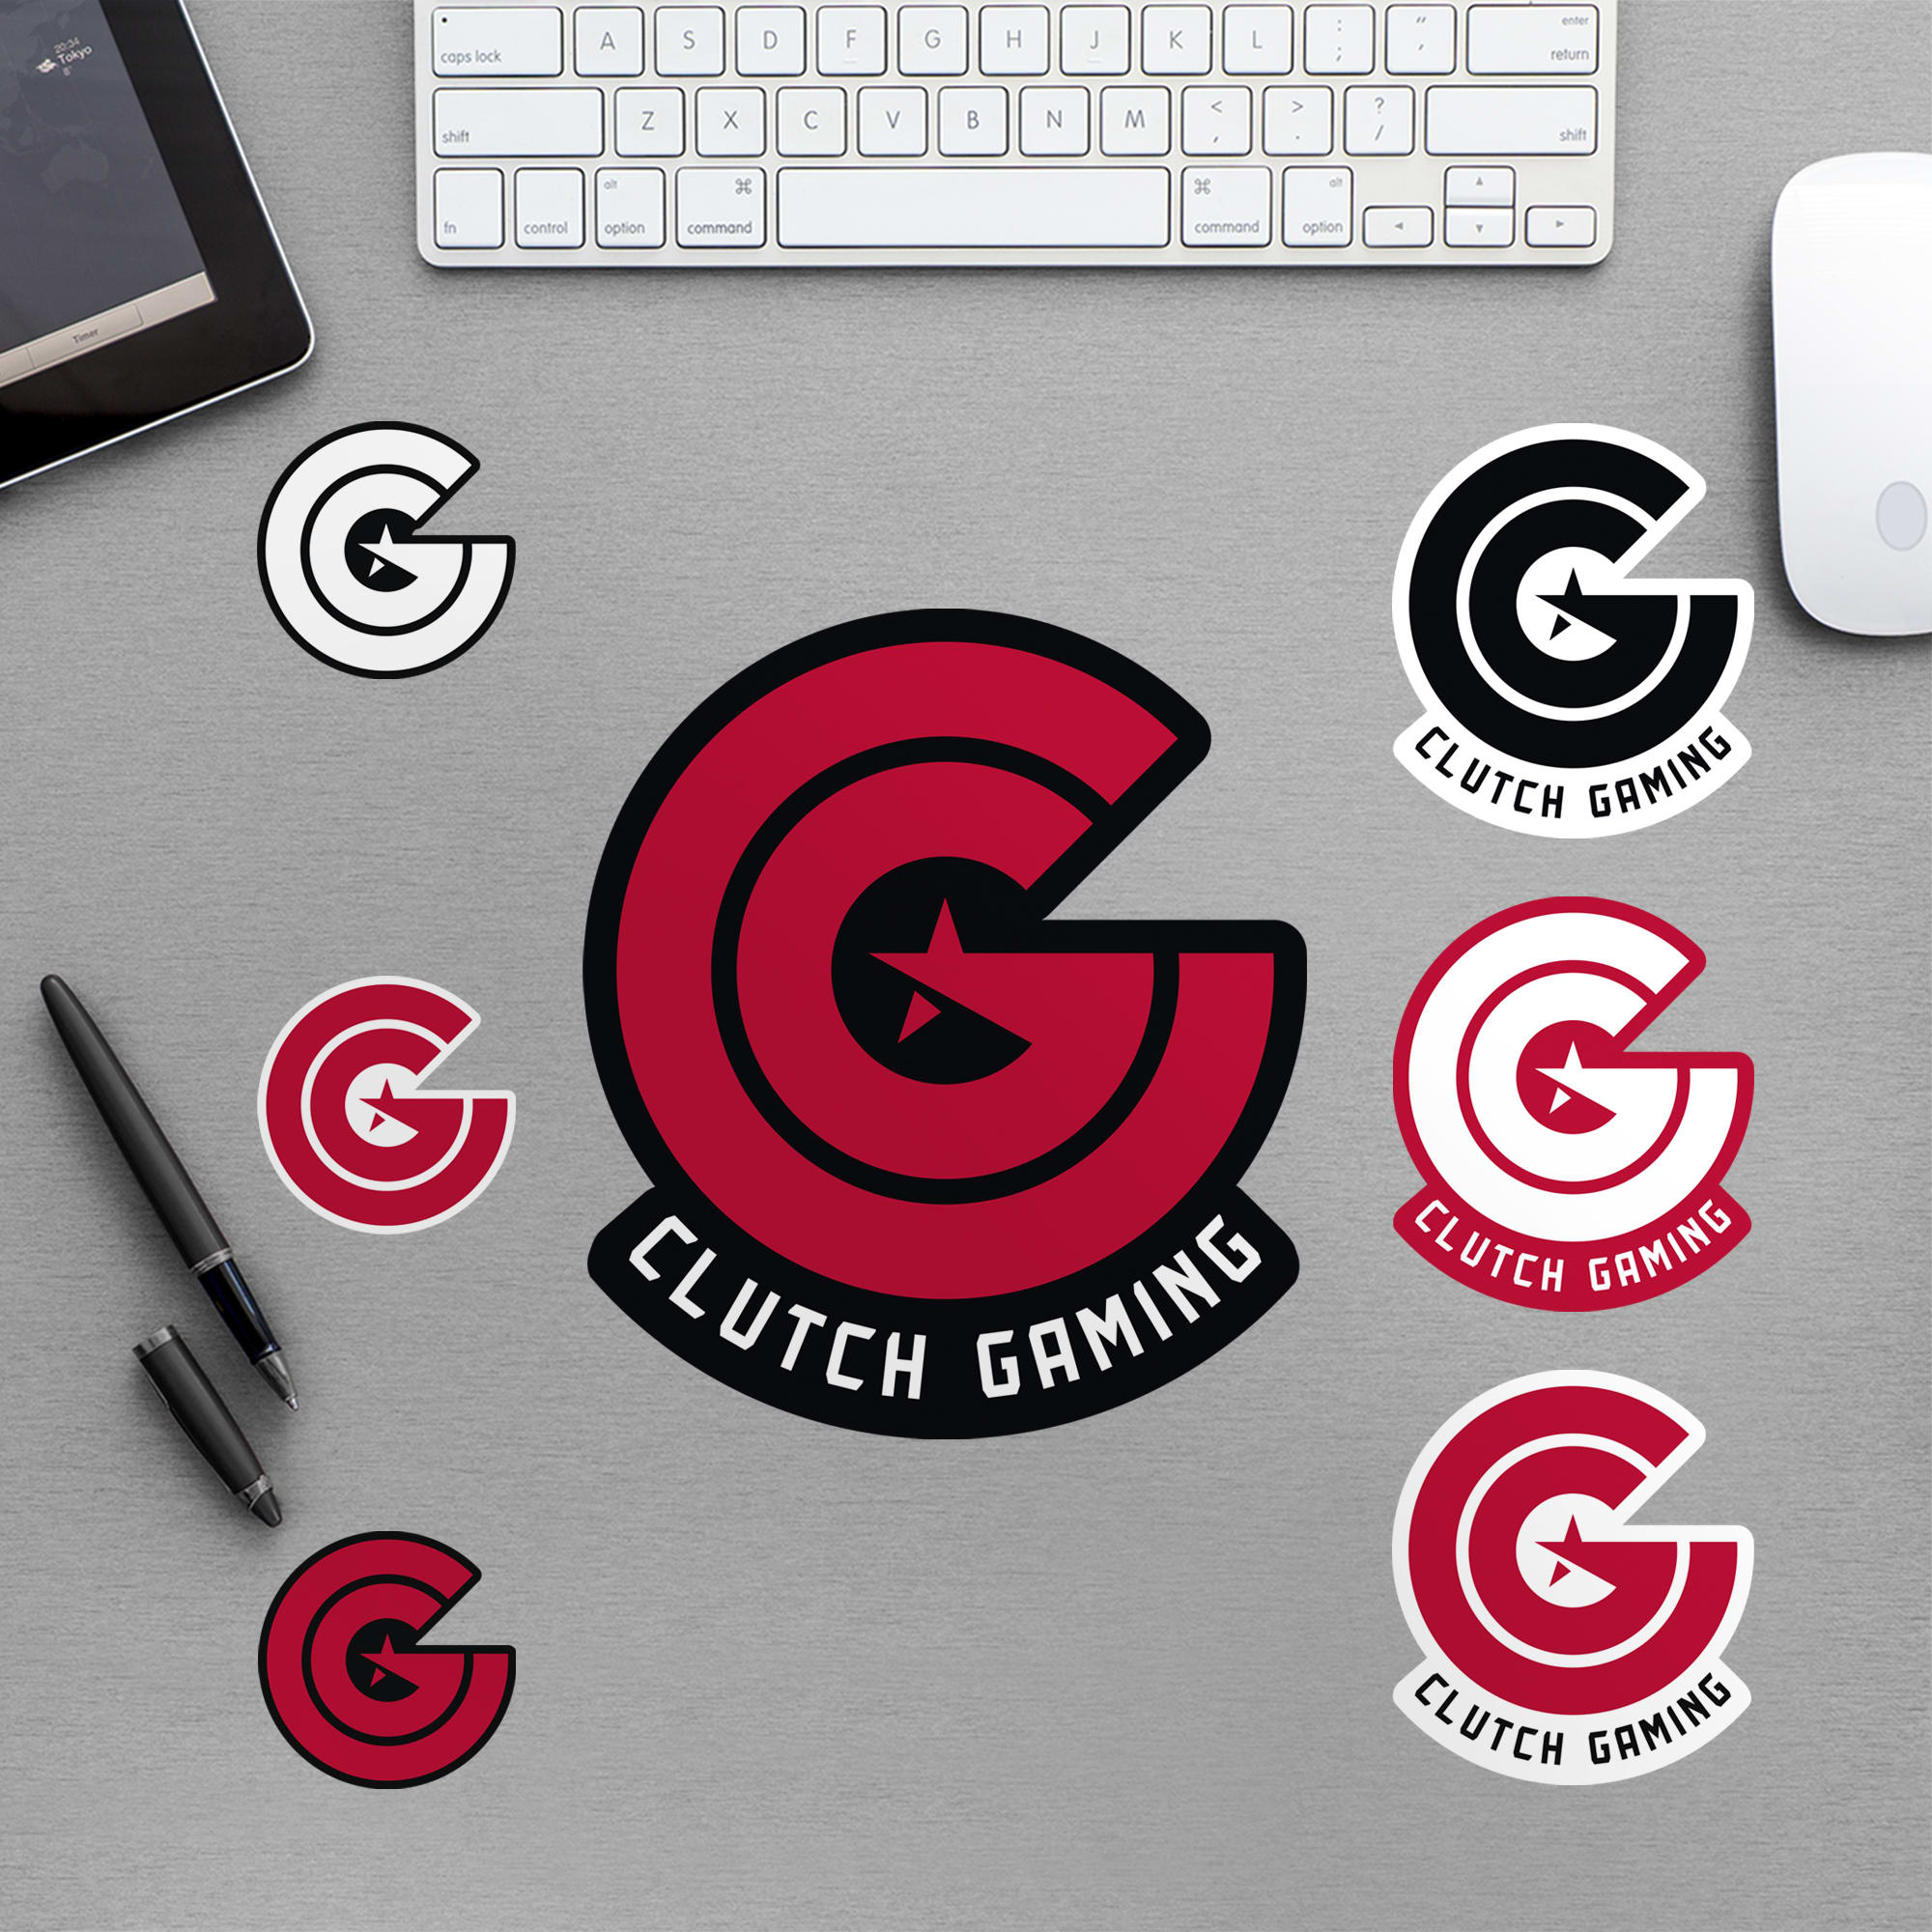 CLUTCH GAMING: LOGO ASSORTMENT - REMOVABLE LAPTOP DECALS by Fathead | Vinyl